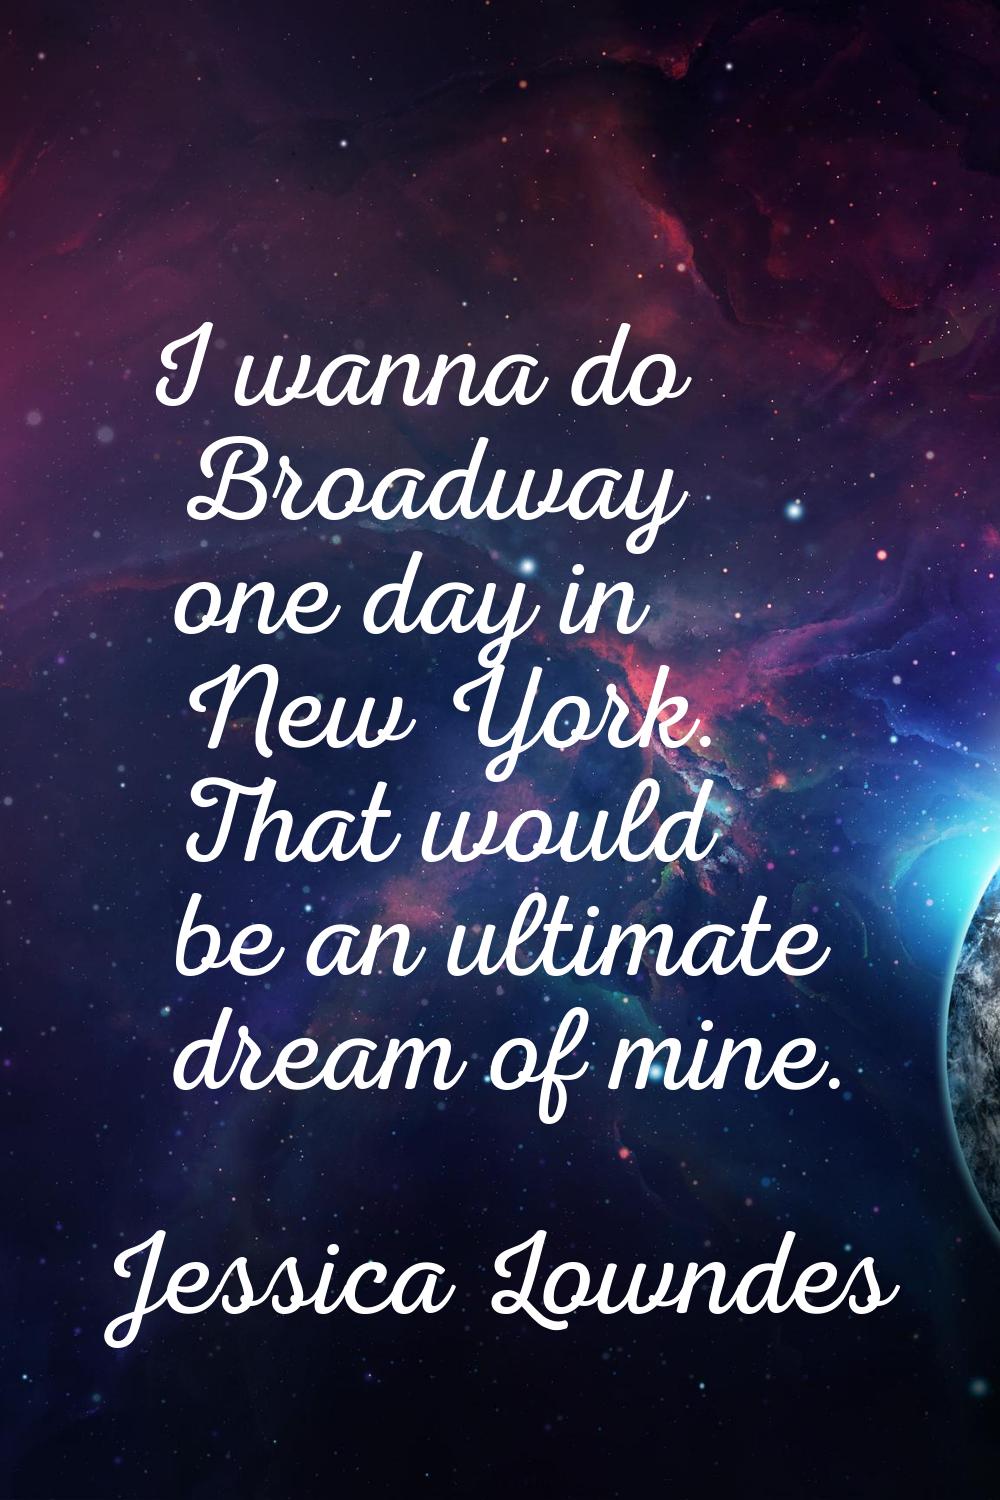 I wanna do Broadway one day in New York. That would be an ultimate dream of mine.